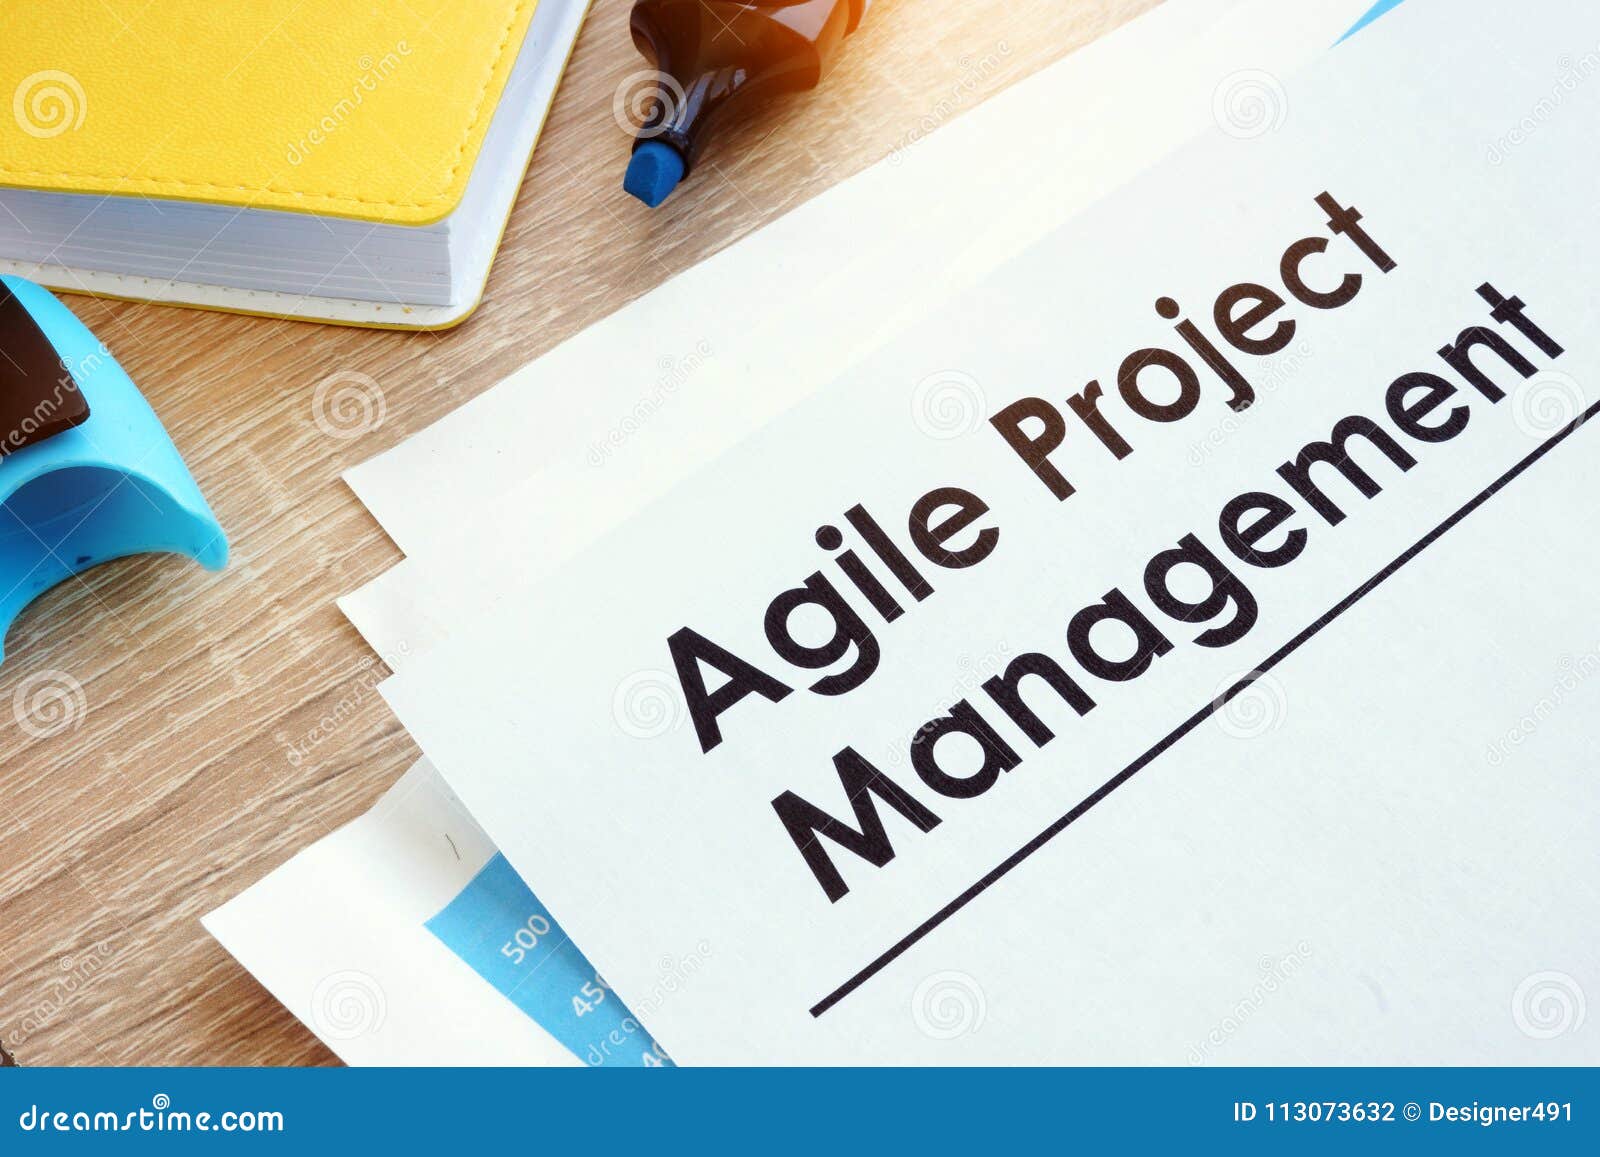 document agile project management on a table.